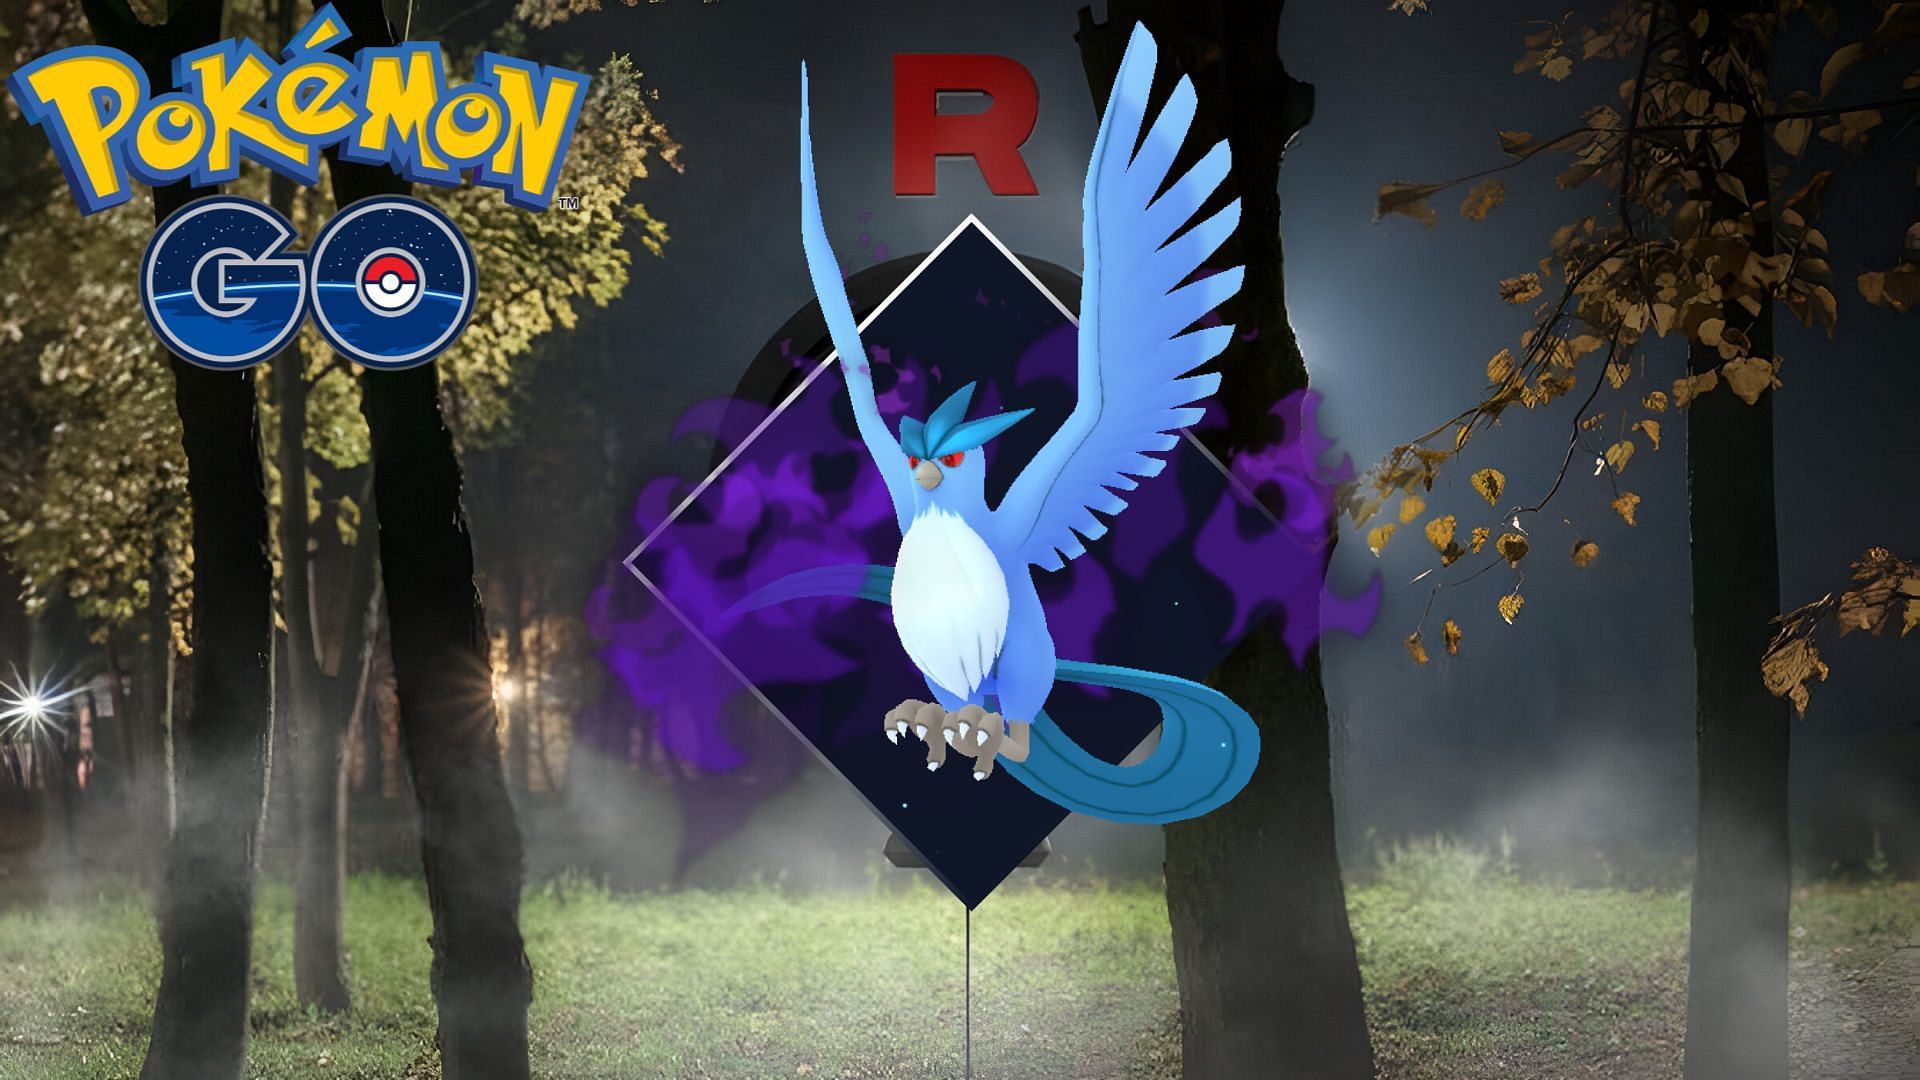 Pokemon GO Articuno/Shadow Articuno PvP and PvE guide: Best